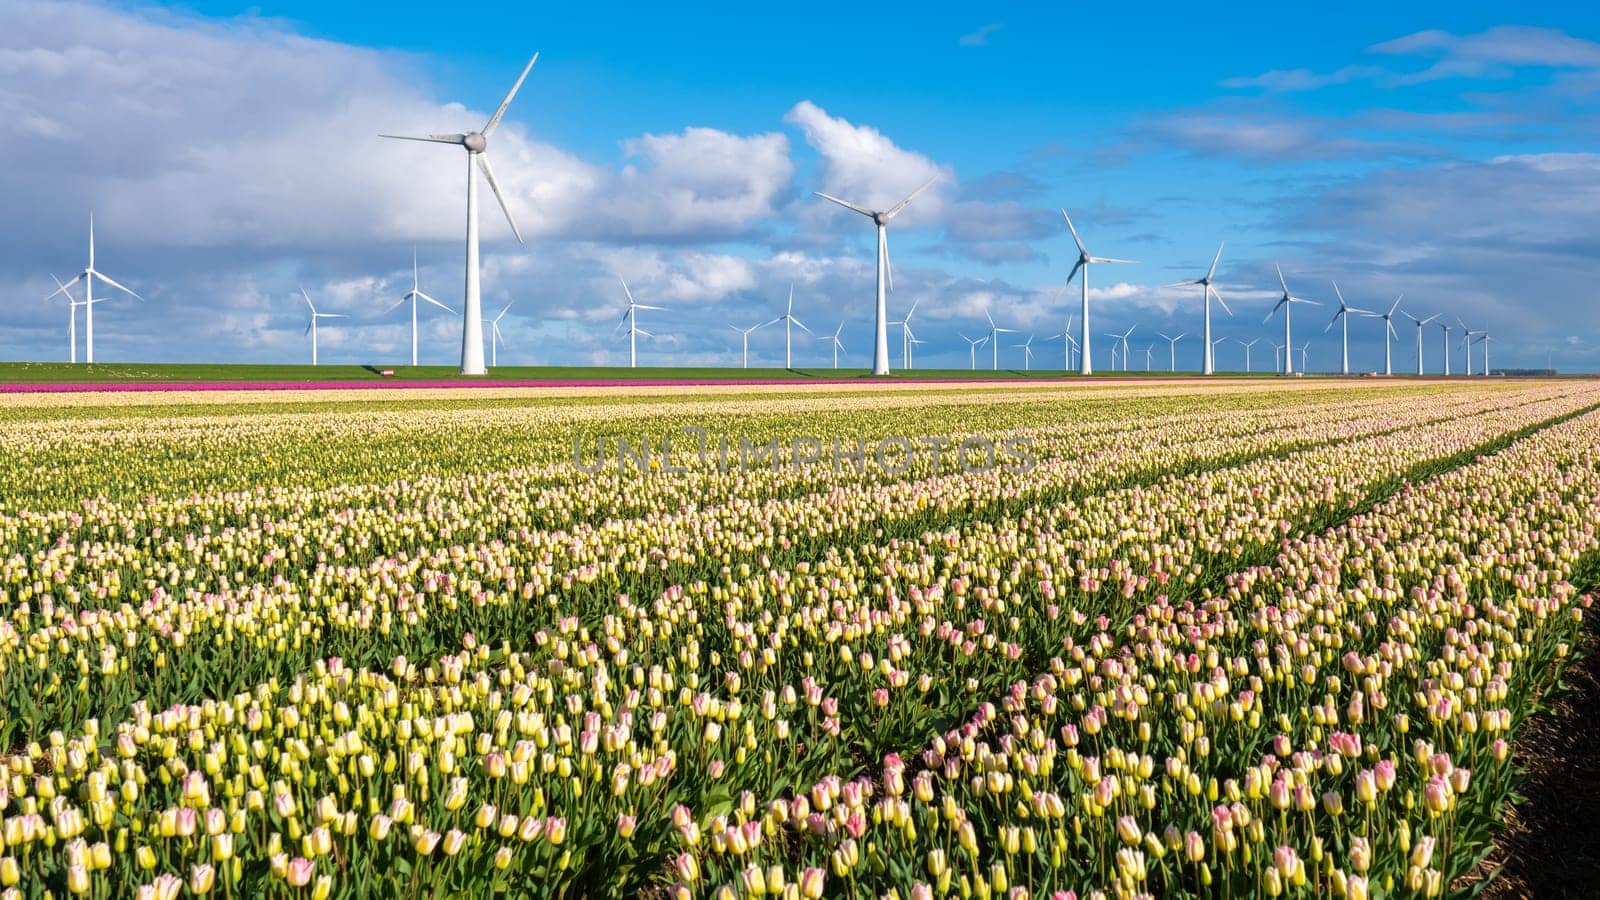 A vibrant field of tulips with elegant wind turbines spinning in the distance, capturing the essence of renewable energy and colorful nature. windmill turbines in the Noordoostpolder Netherlands